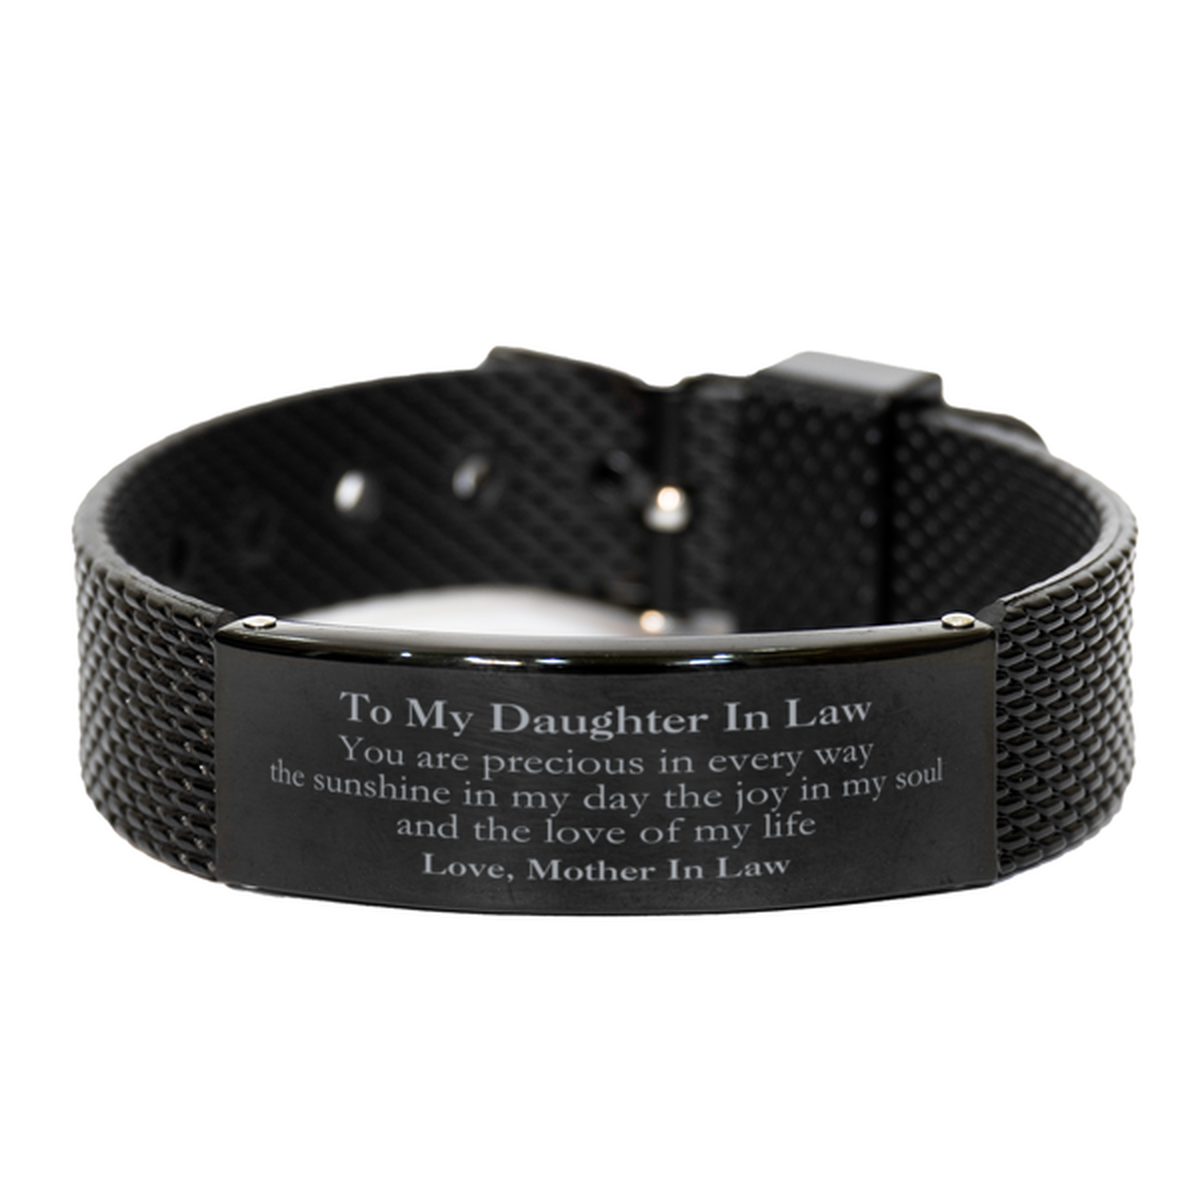 Graduation Gifts for Daughter In Law Black Shark Mesh Bracelet Present from Mother In Law, Christmas Daughter In Law Birthday Gifts Daughter In Law You are precious in every way the sunshine in my day. Love, Mother In Law